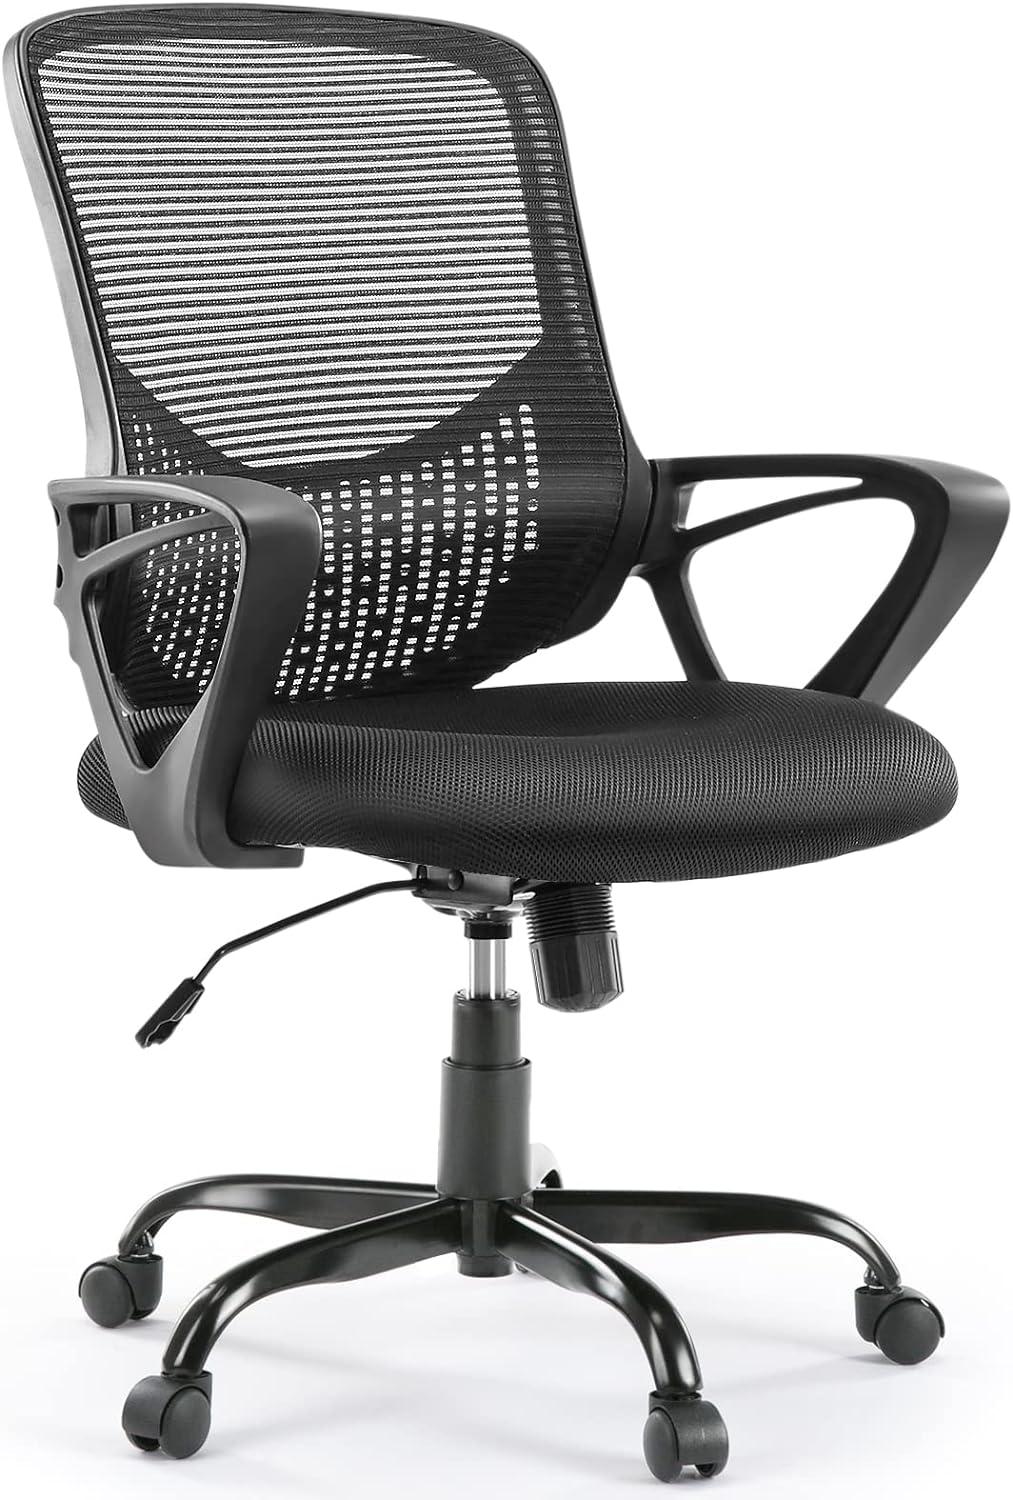 AFO Home Office Ergonomic Mesh Mid-Back Chair $39.18 + Free Shipping